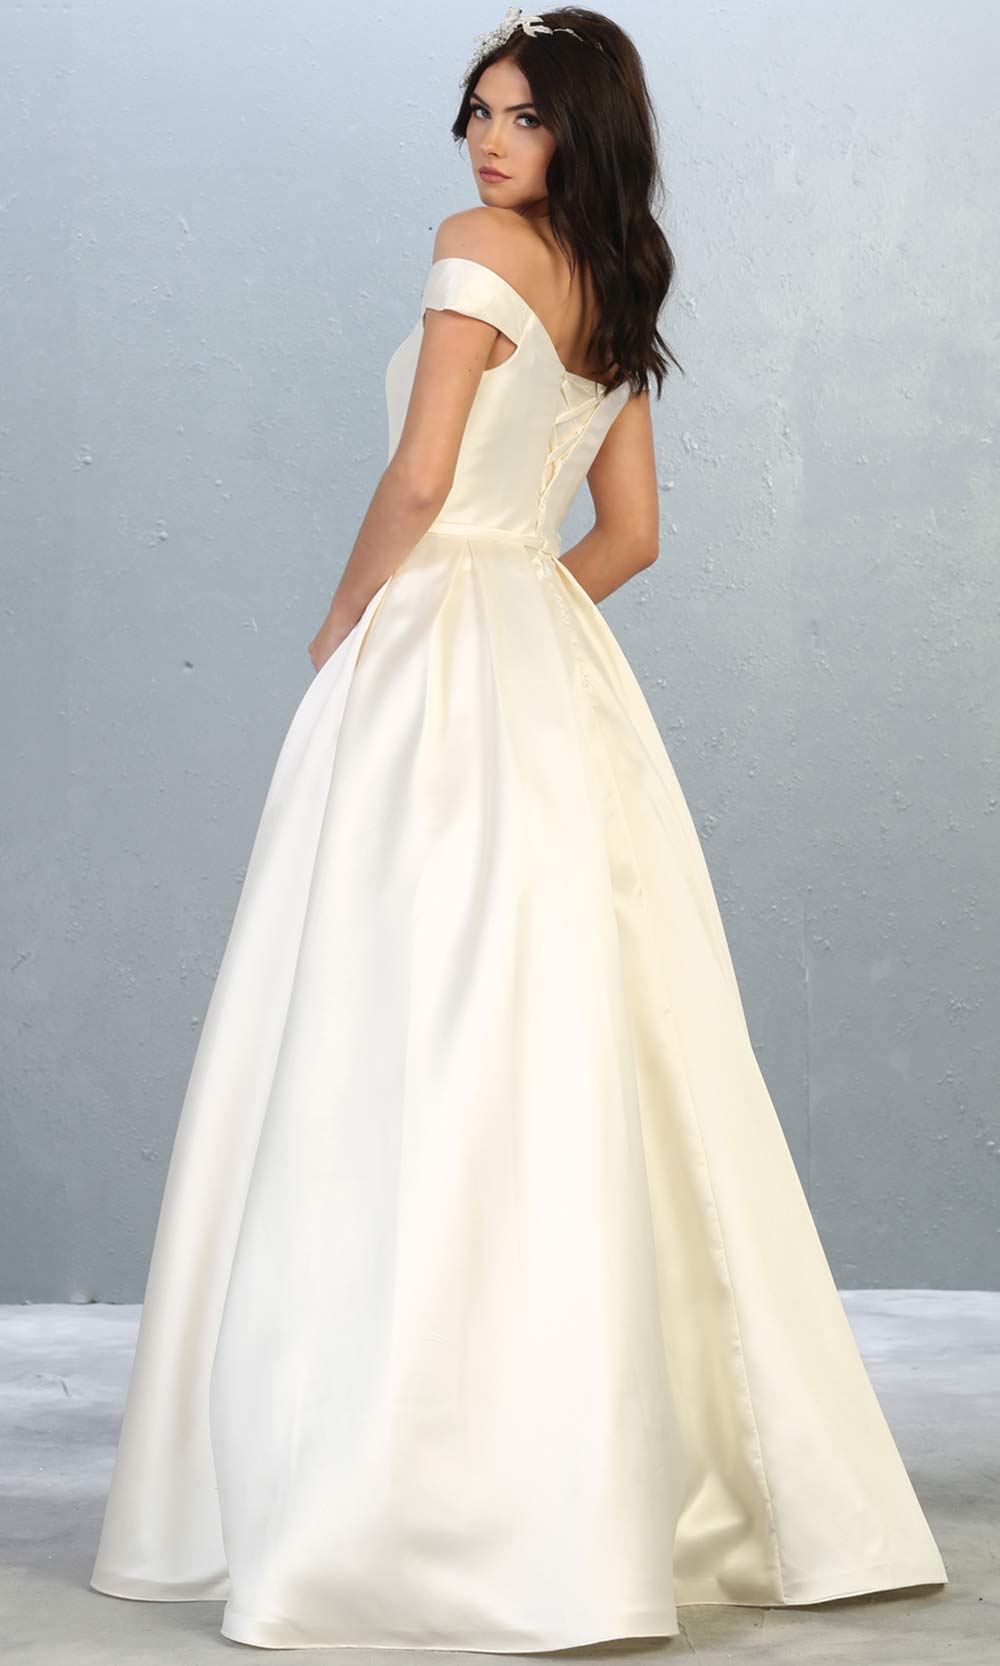 Mayqueen MQ1784-long ivory satin simple flowy bridal off shoulder dress. White formal dress is perfect for wedding bridal dress, white prom dress, simple wedding,second wedding, destination wedding dress, second wedding dress.Plus sizes avail-back.jpg